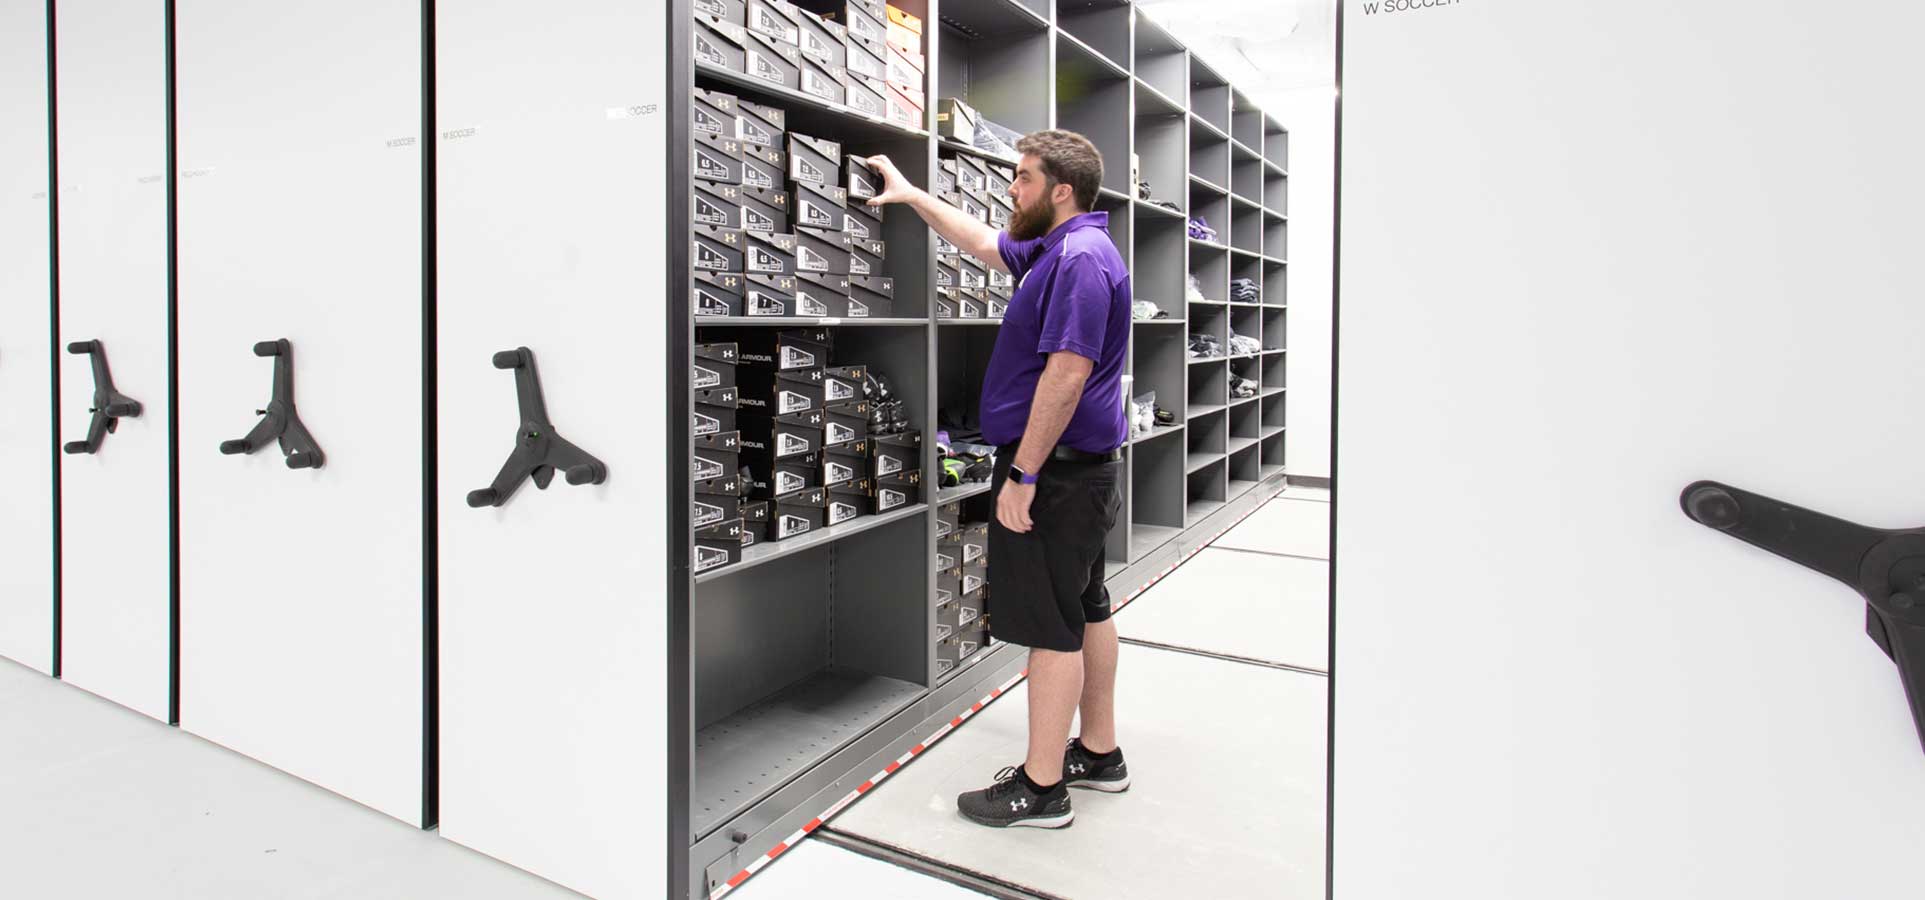 big 10 football team gear storage on high-density mobile system with staff member retrieving what's needed